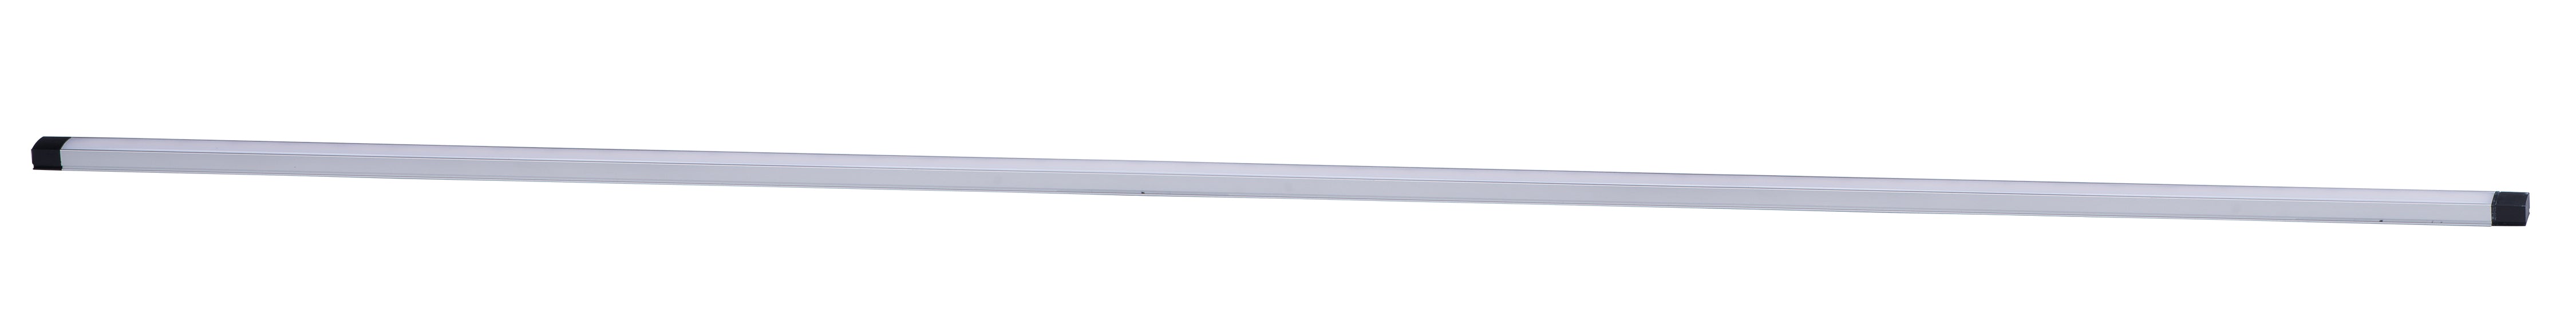 CounterMax MX-L-24-SS LED Under Cabinet in Brushed Aluminum